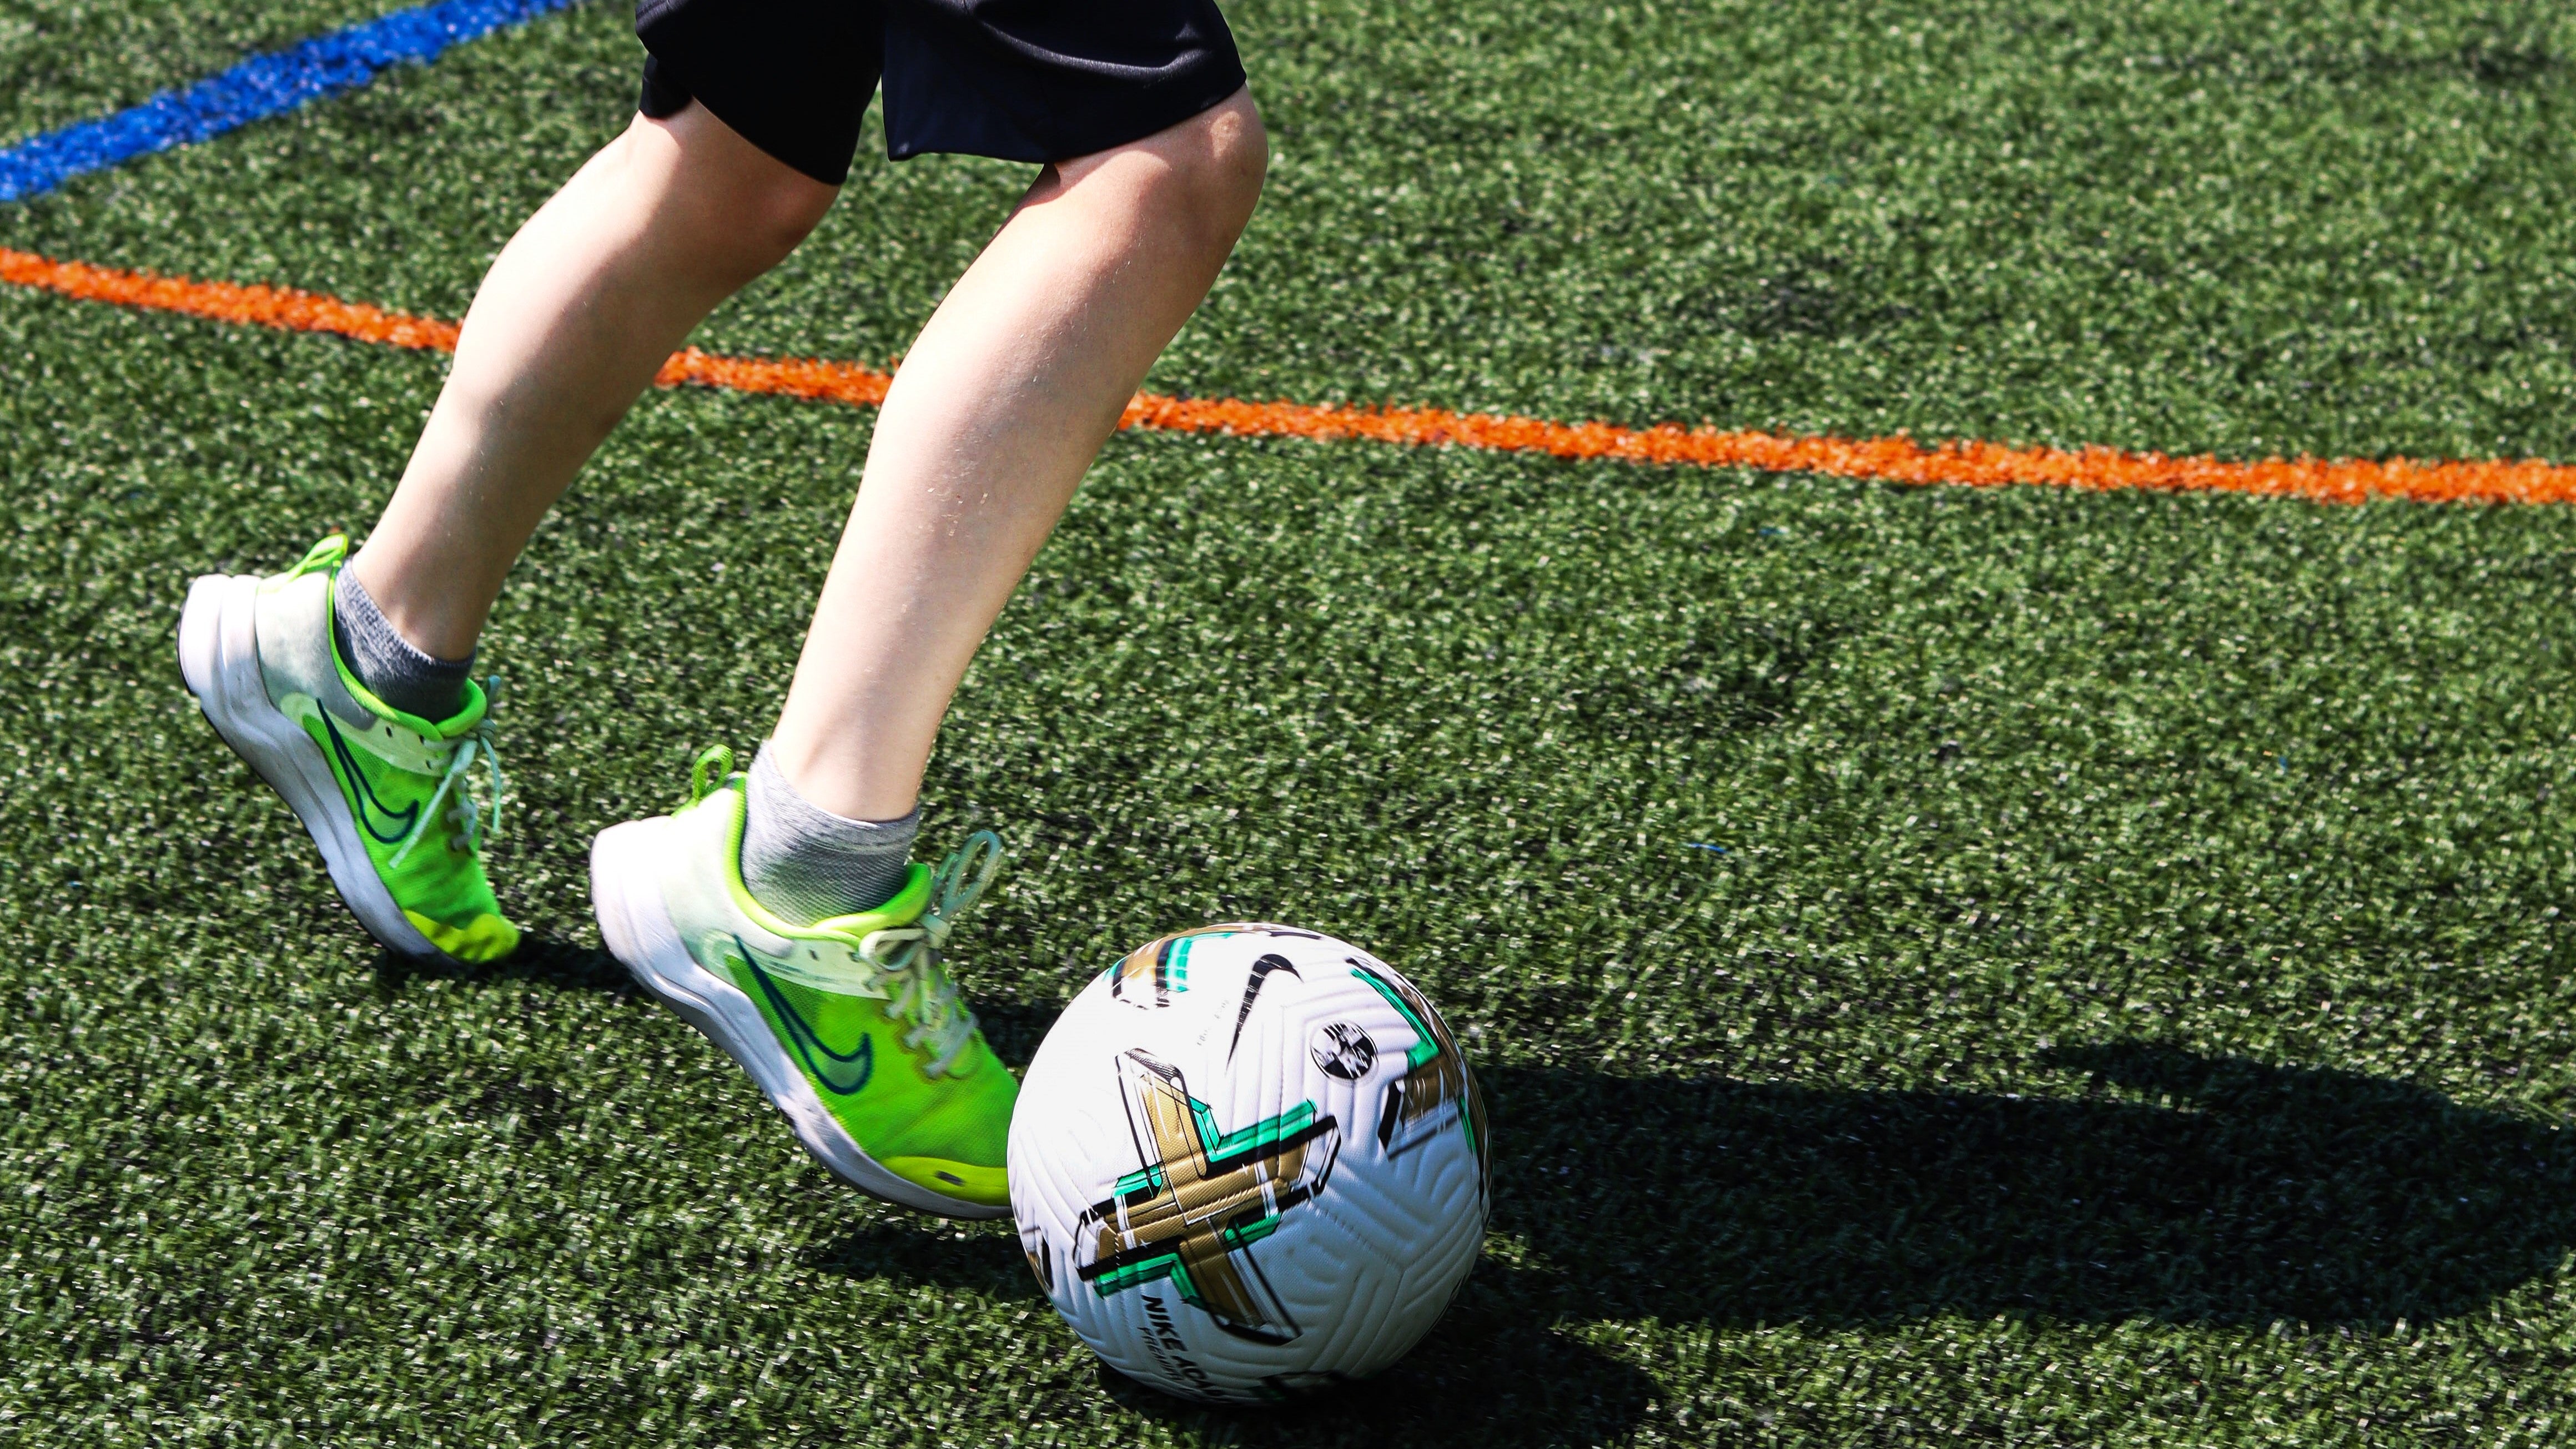 Make Headway: Best Soccer Training Equipment to Increase Agility